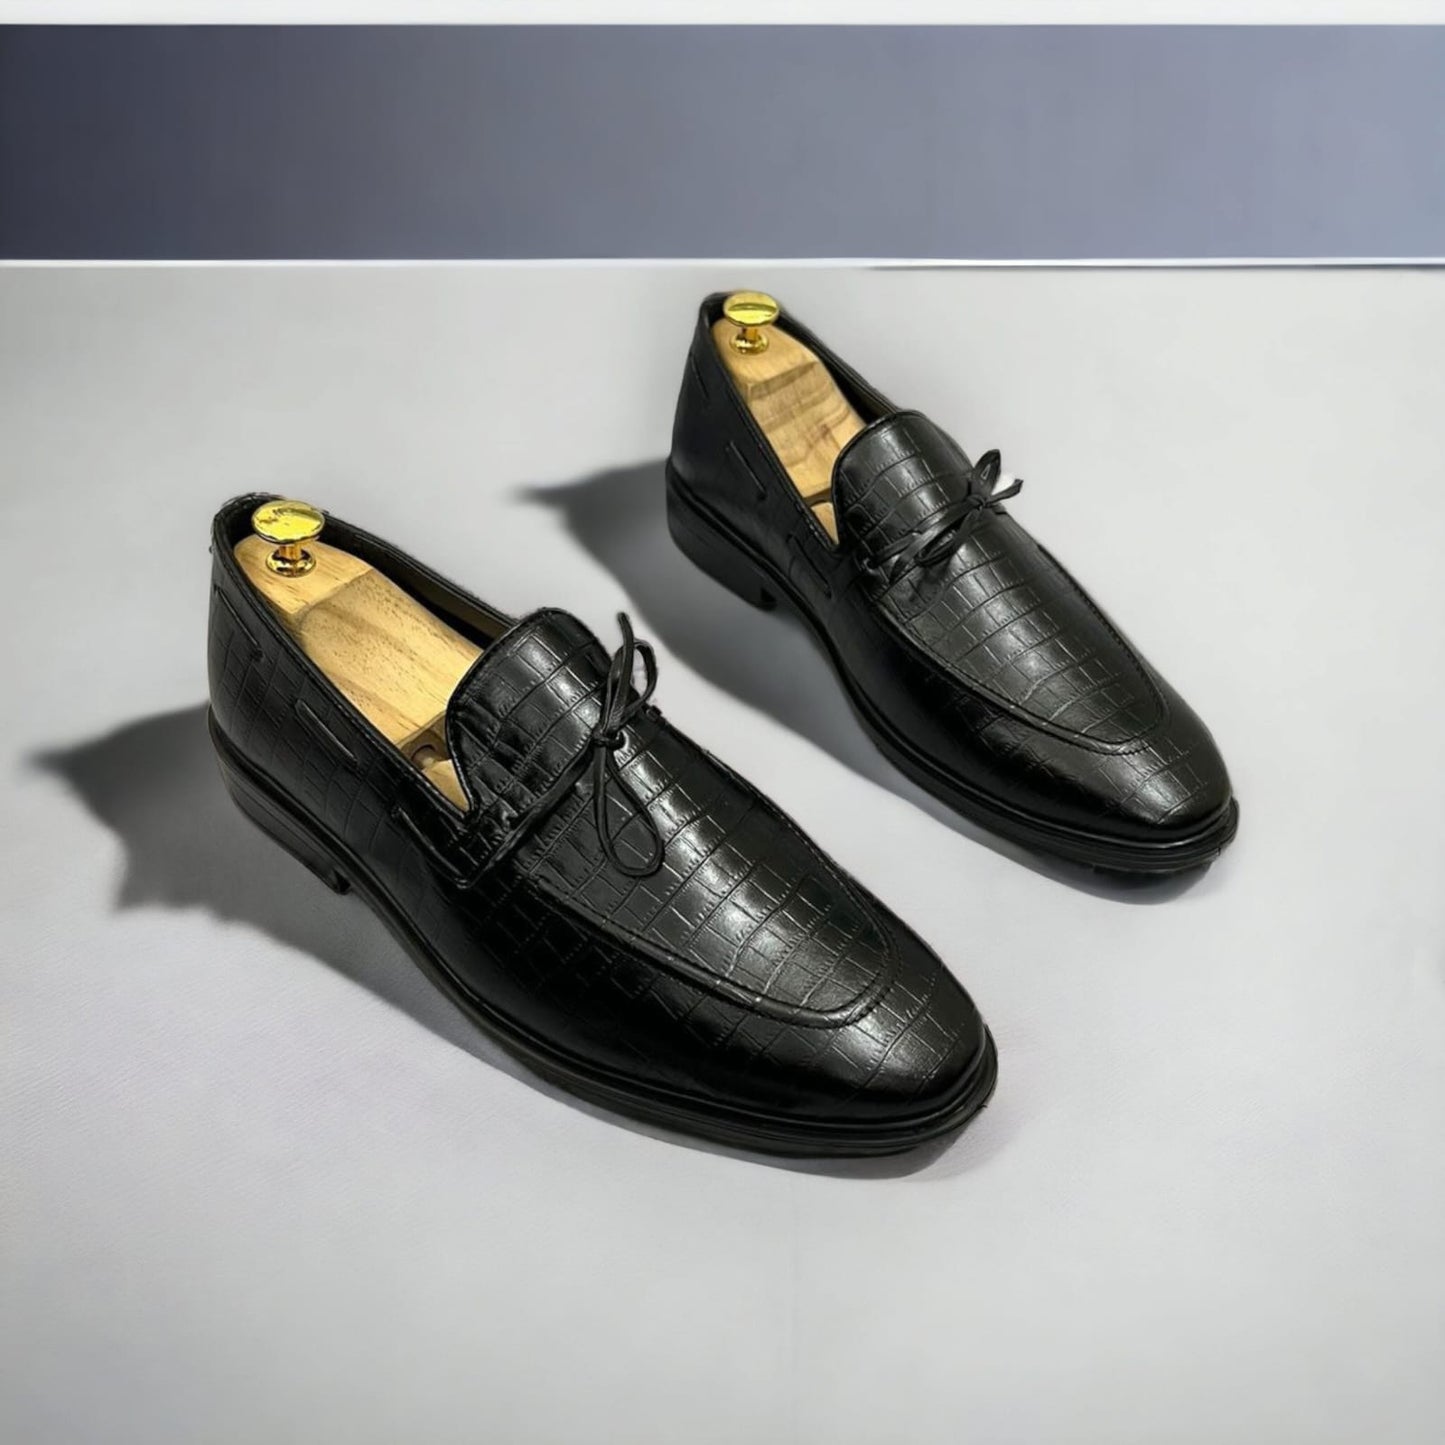 Jack Marc Fashion Tassel Loafer Formal Casual For Party Attire